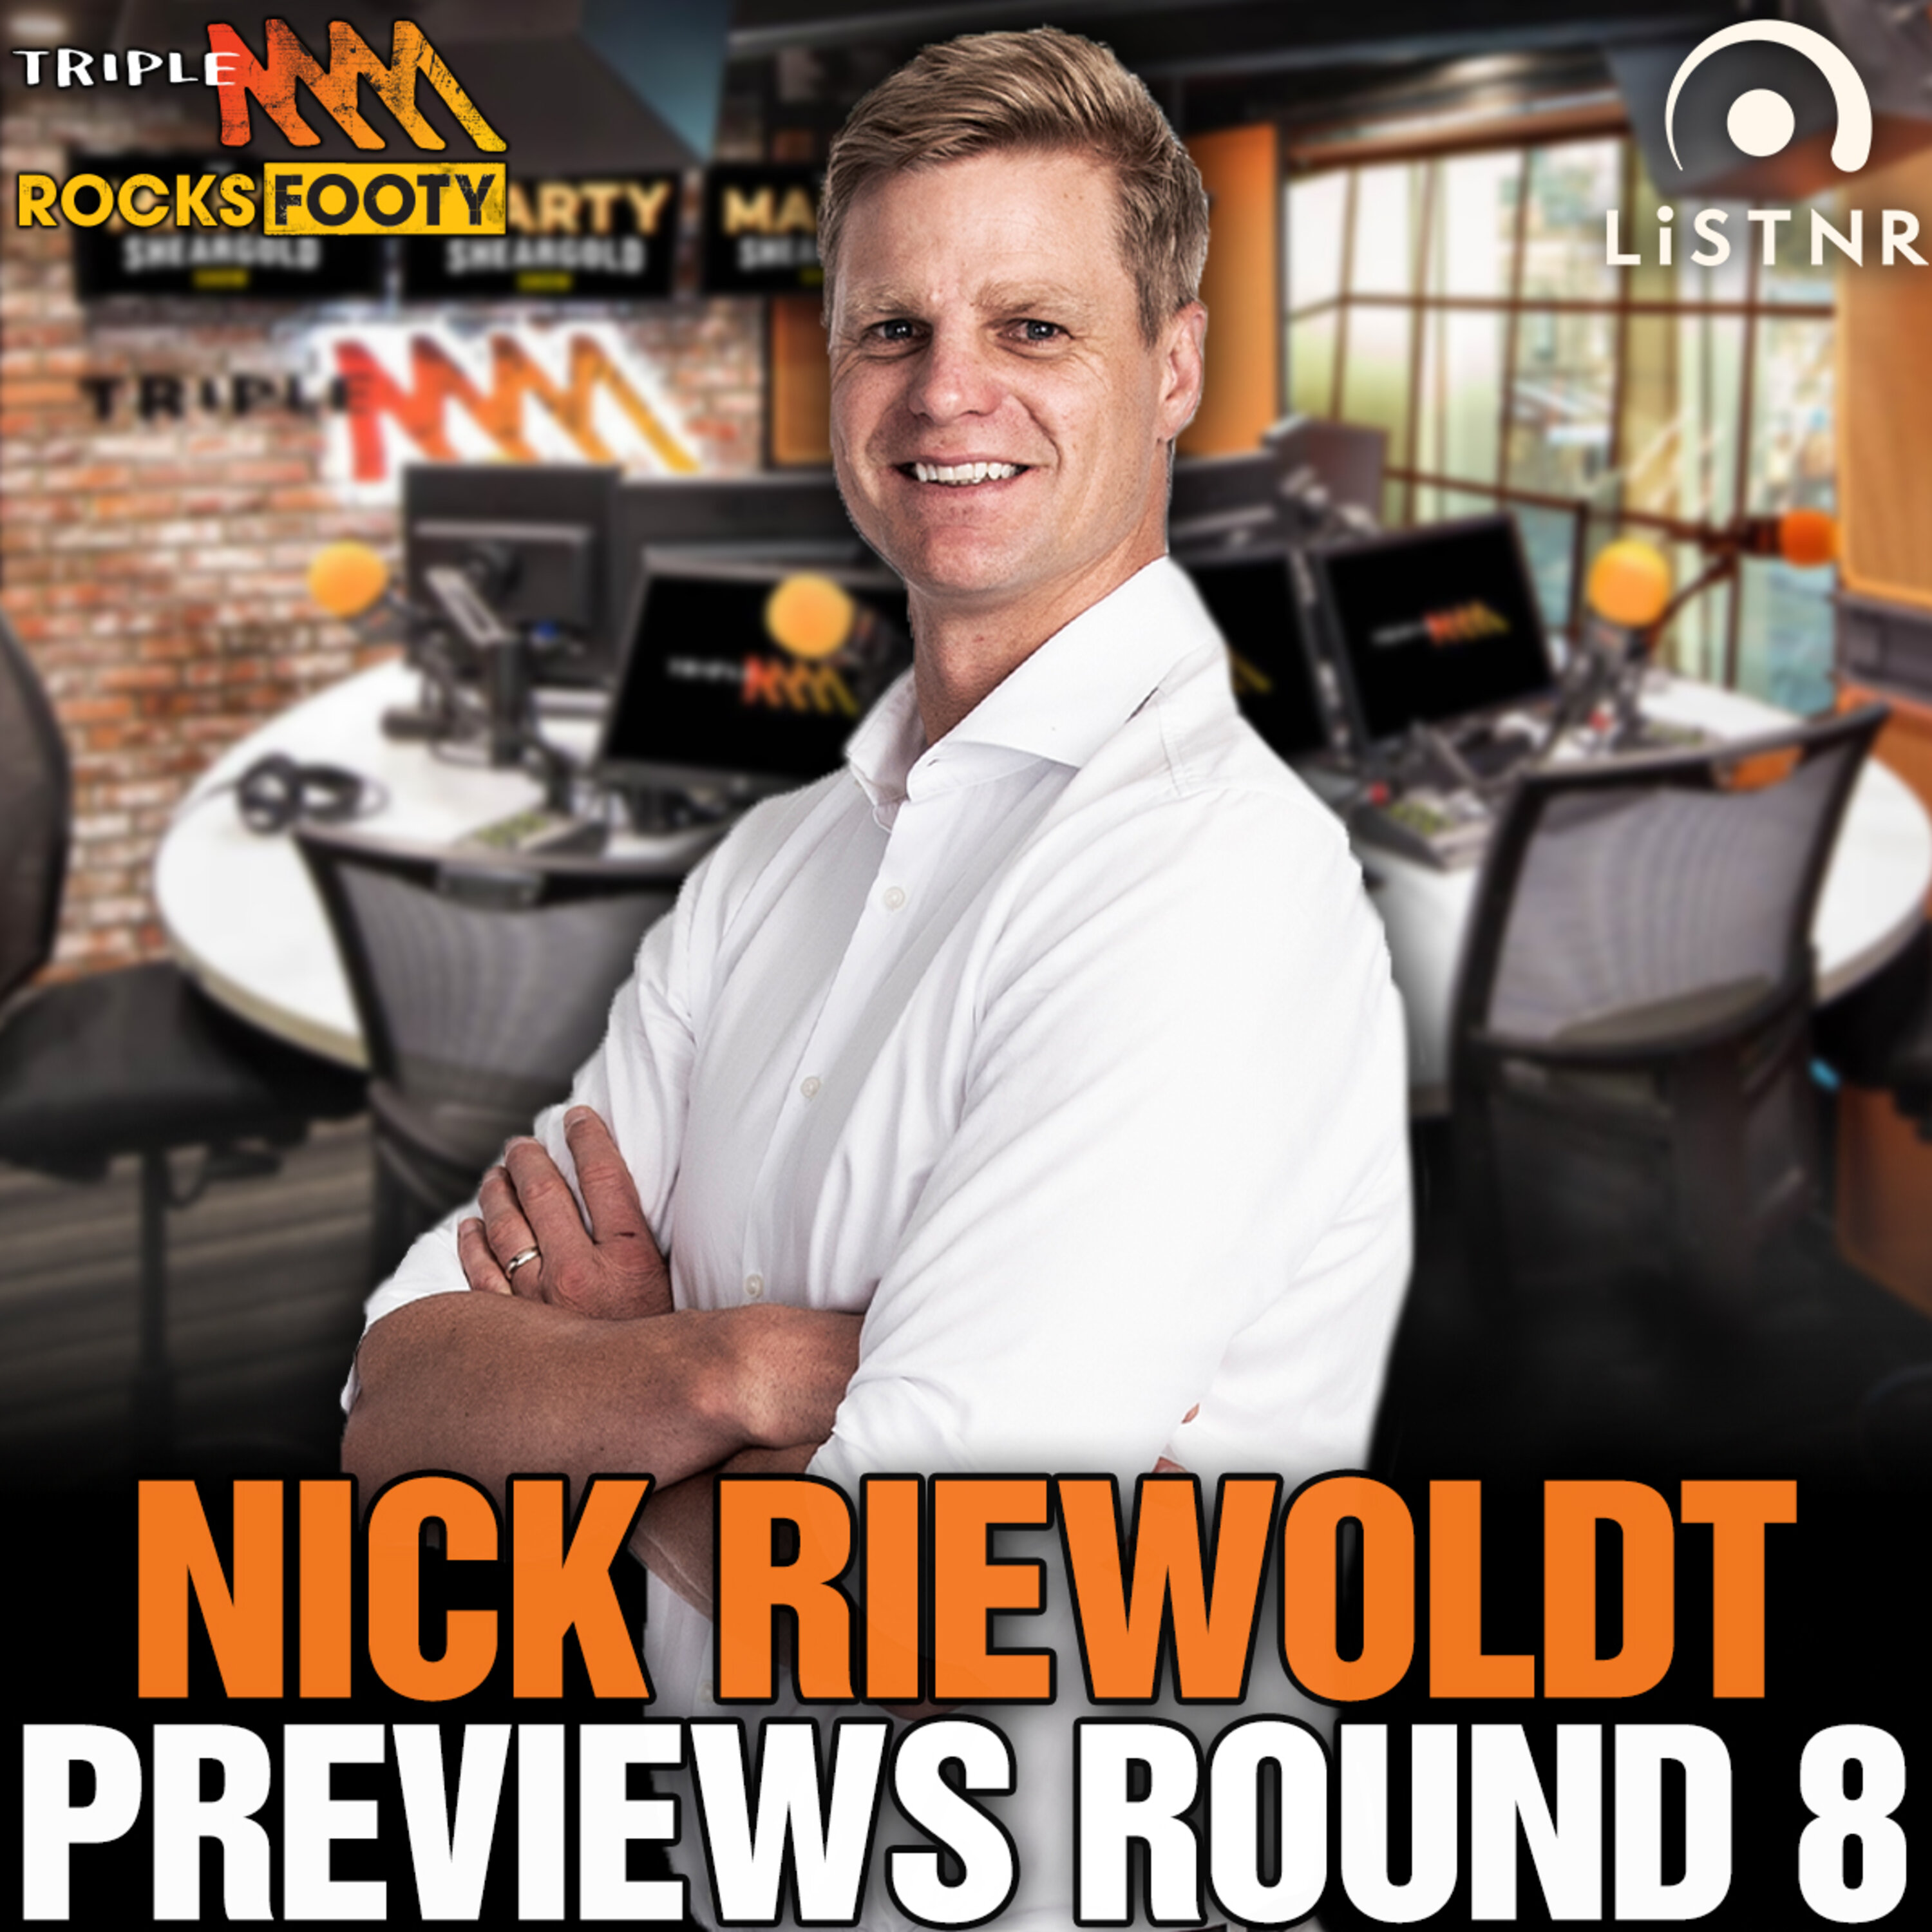 Nick Riewoldt on why West Coast should be watching underdog sport movies, why he loves Jack Ginnivan, and a round 8 preview